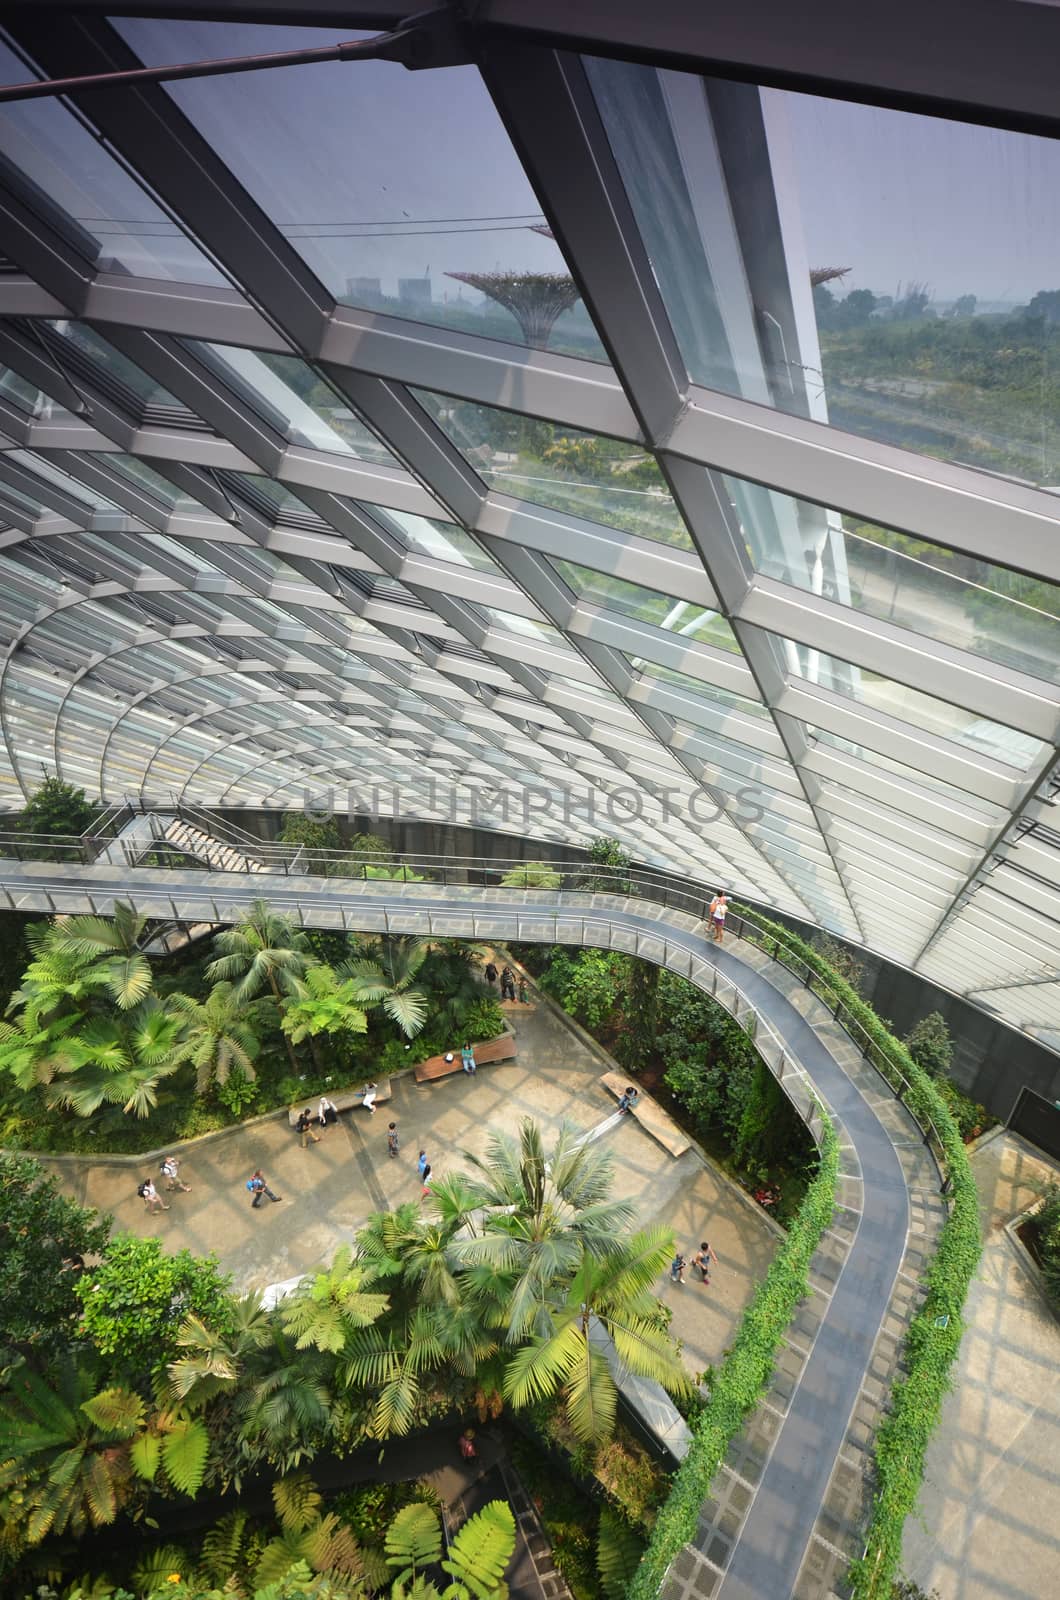 SINGAPORE- SEP 7: View of Cloud Forest at Gardens by the Bay on September 7, 2015. in Singapore. Gardens by the Bay is a park spanning 101 hectares of reclaimed land.